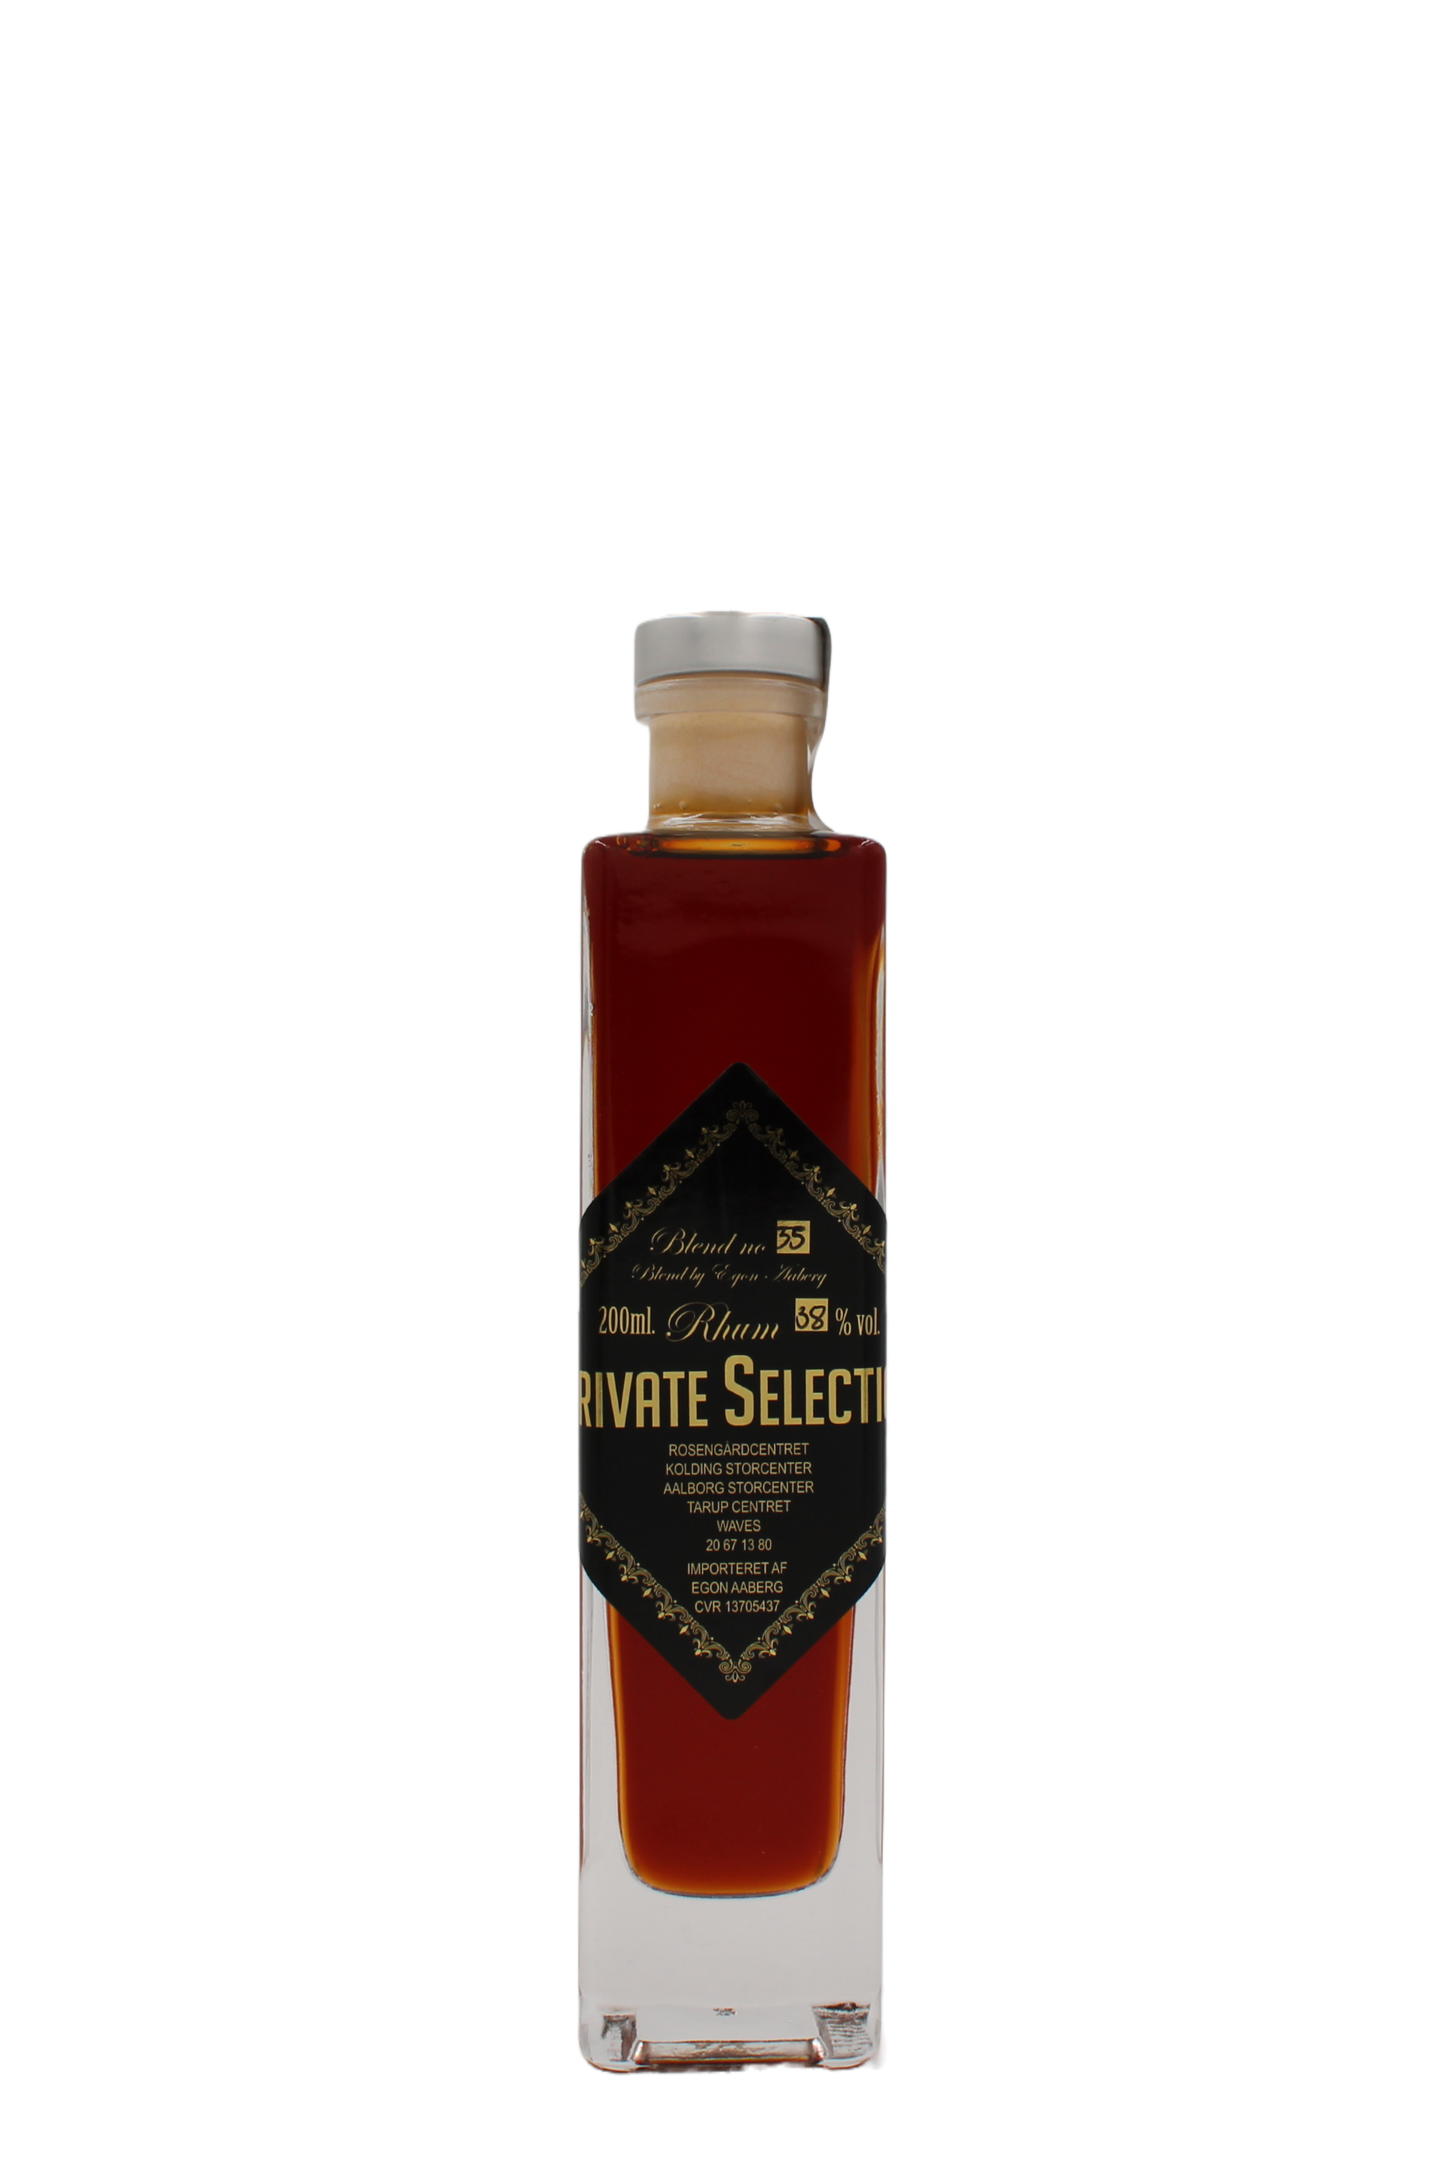 Private Selection - Blend no. 35 200ml